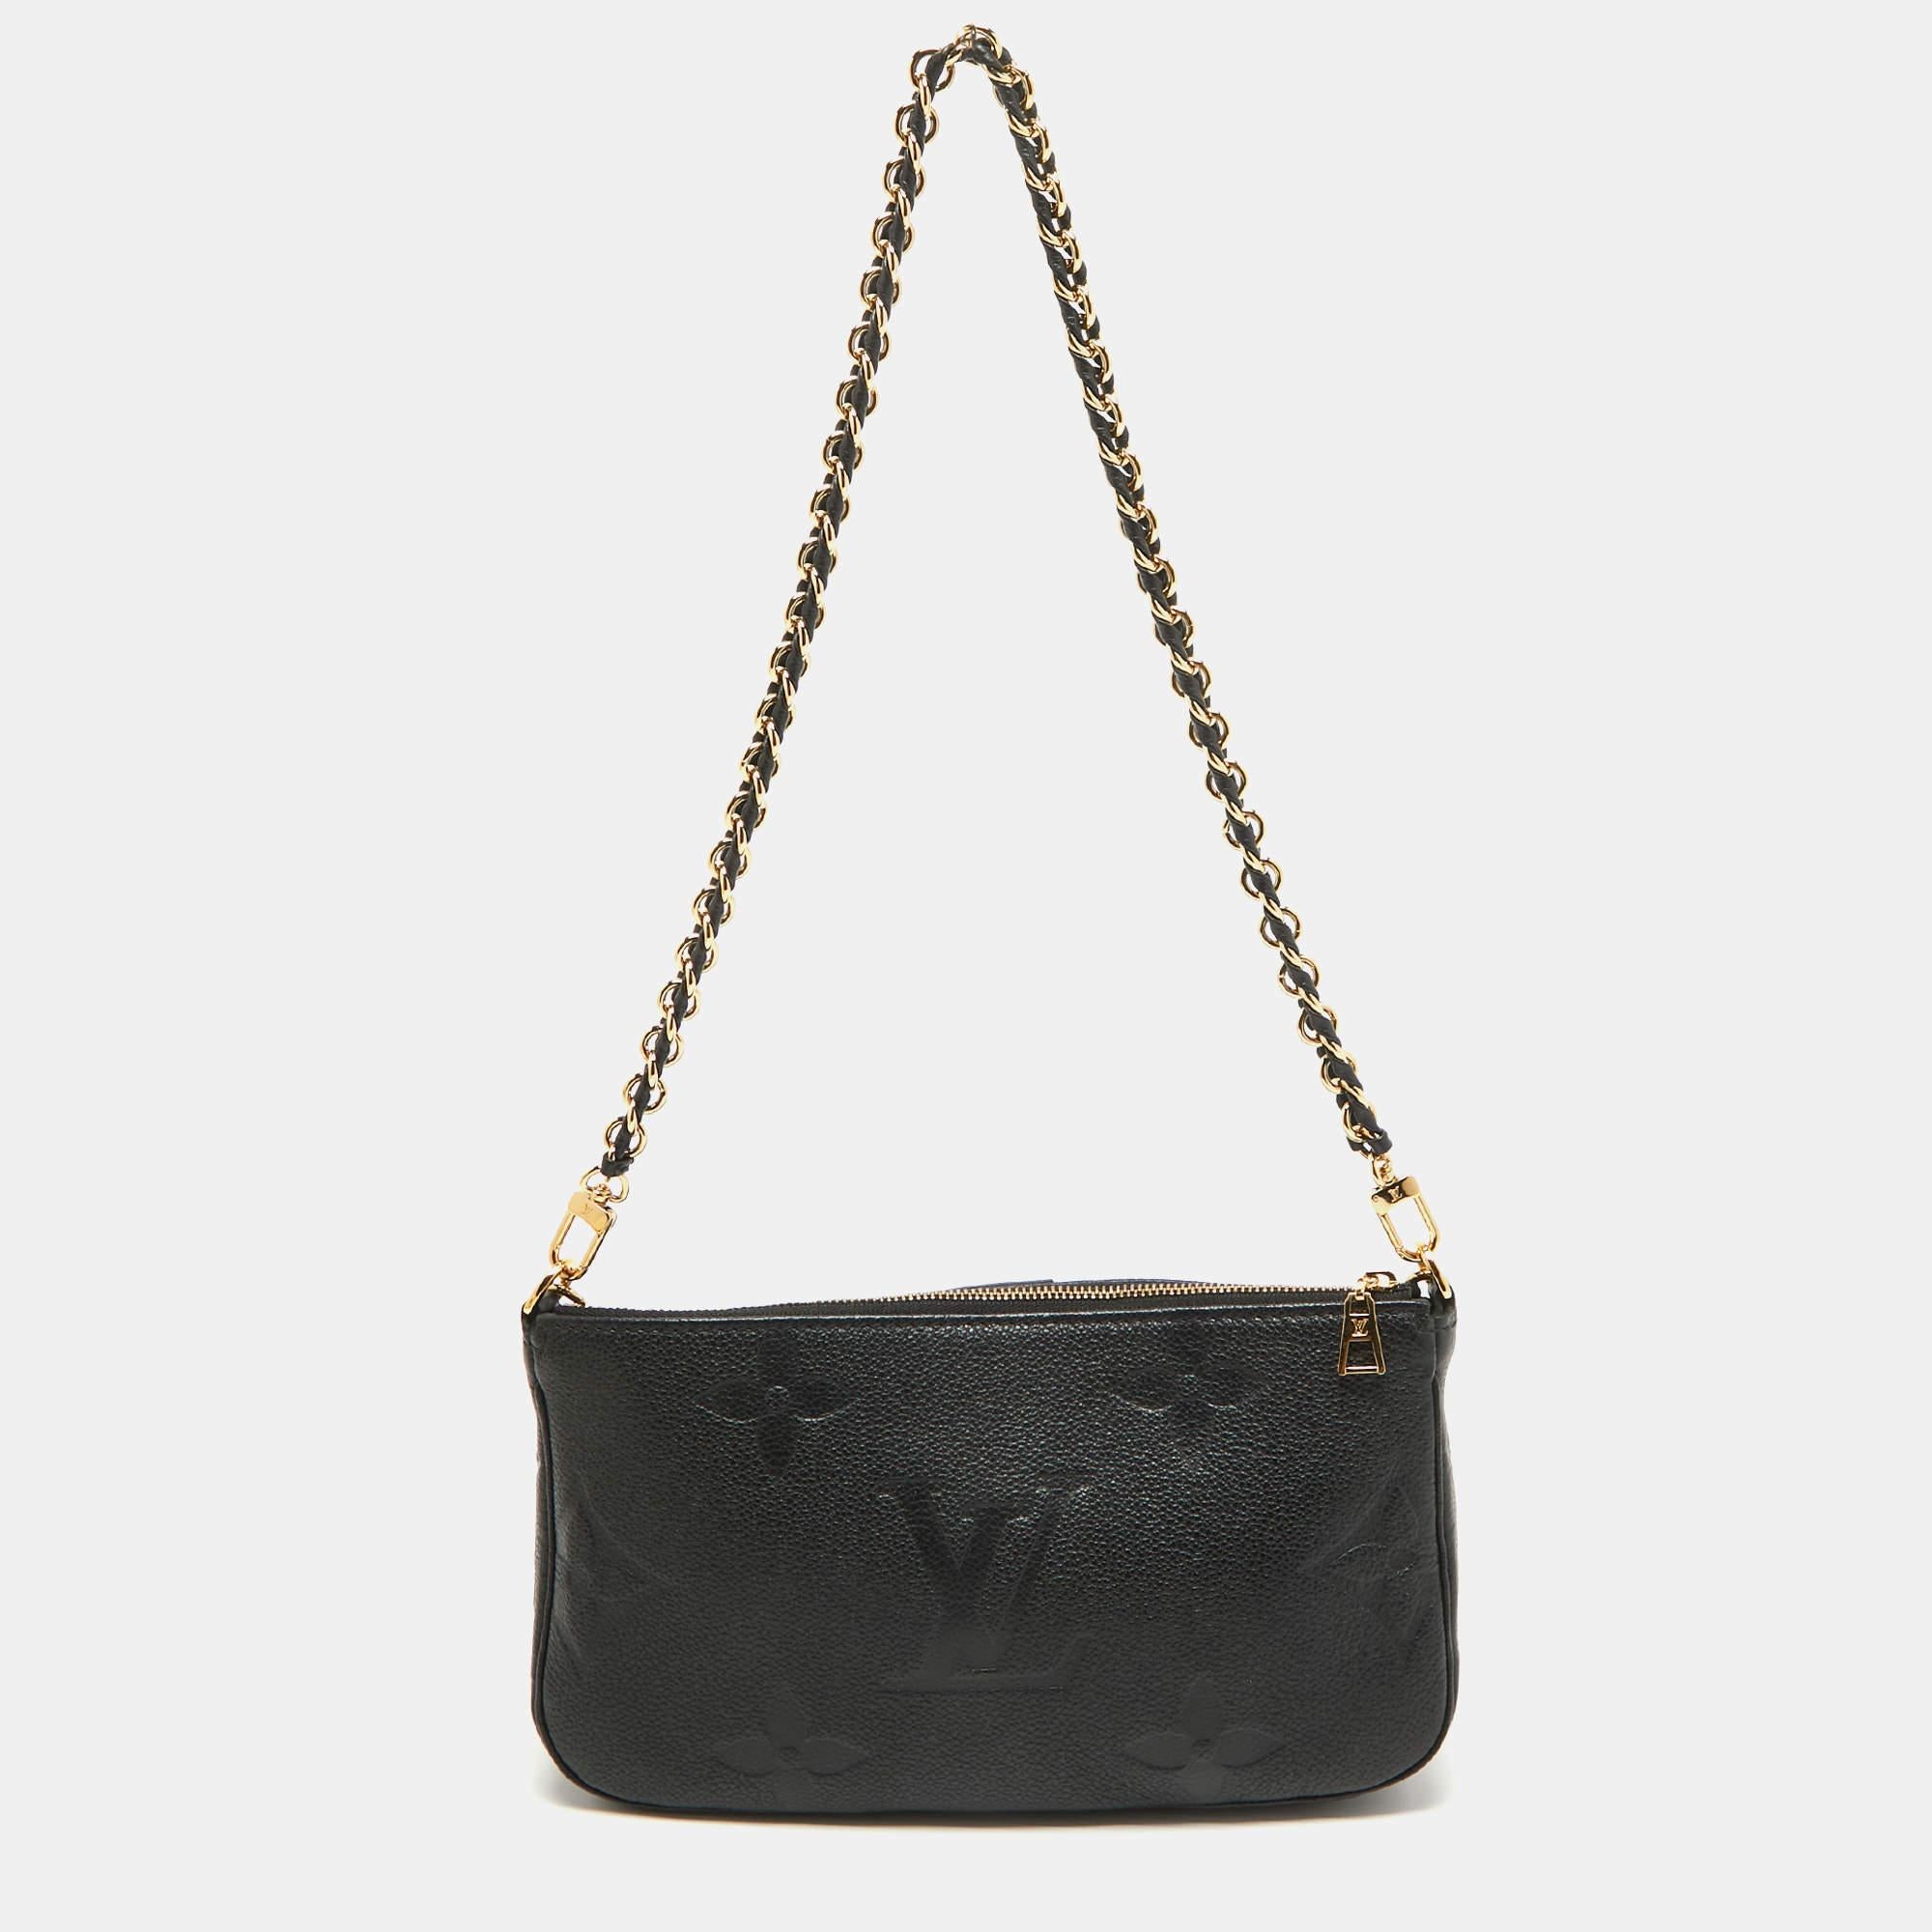 Louis Vuitton's Multi Pochette Accessoires is fabulous creation that has two pouches and a woven chain strap, all detachable. Crafted using Monogram Empreinte leather, the creation is a light and fail-proof style ally.

Includes: Original Dustbag,